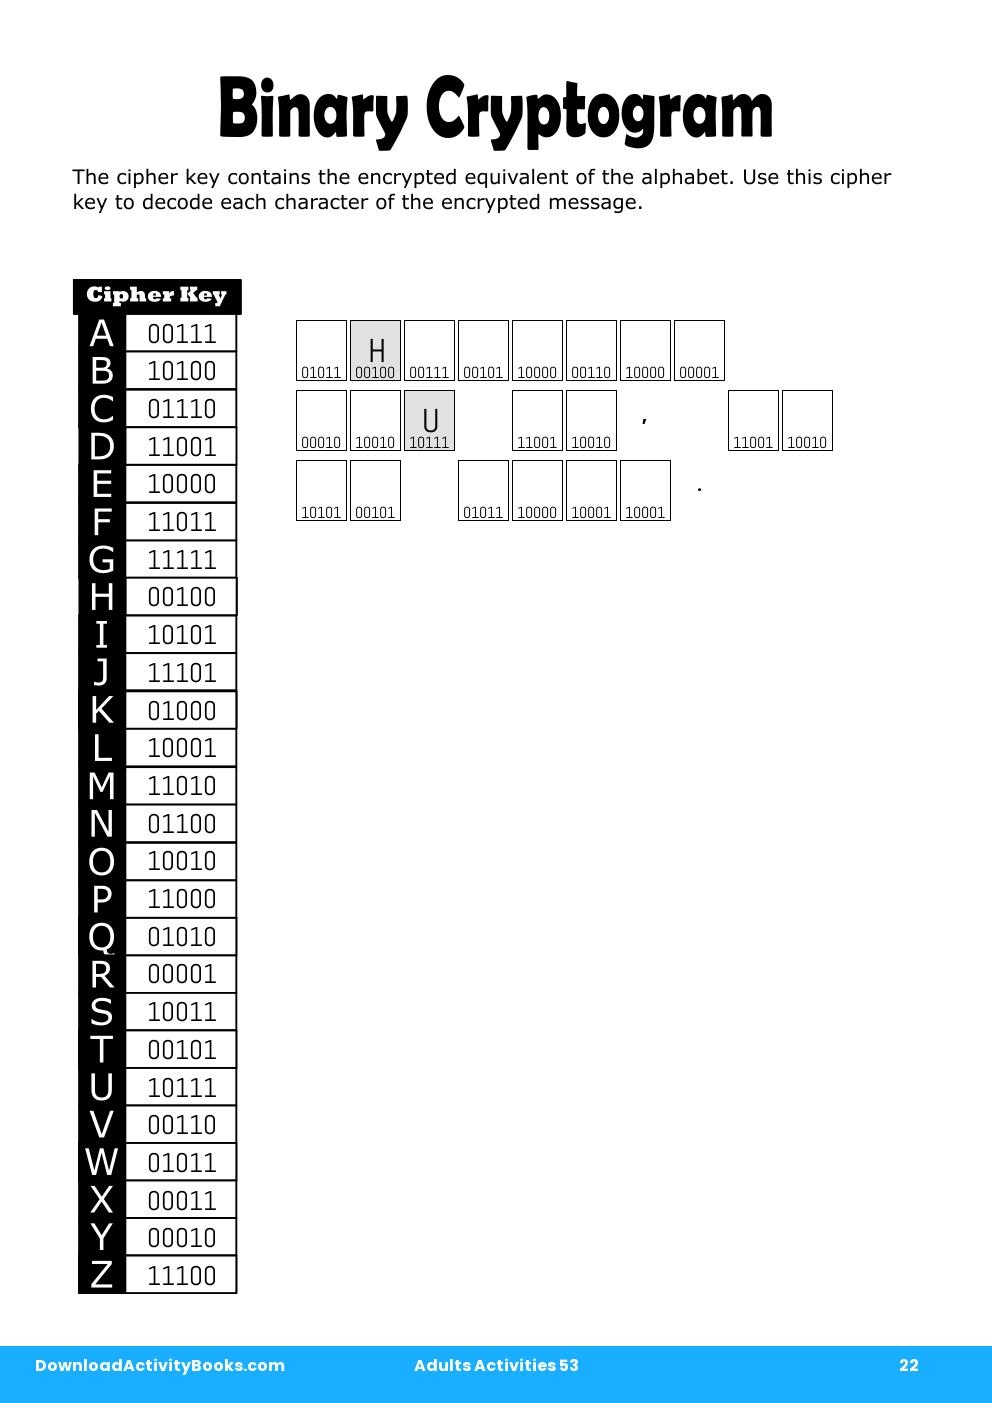 Binary Cryptogram in Adults Activities 53